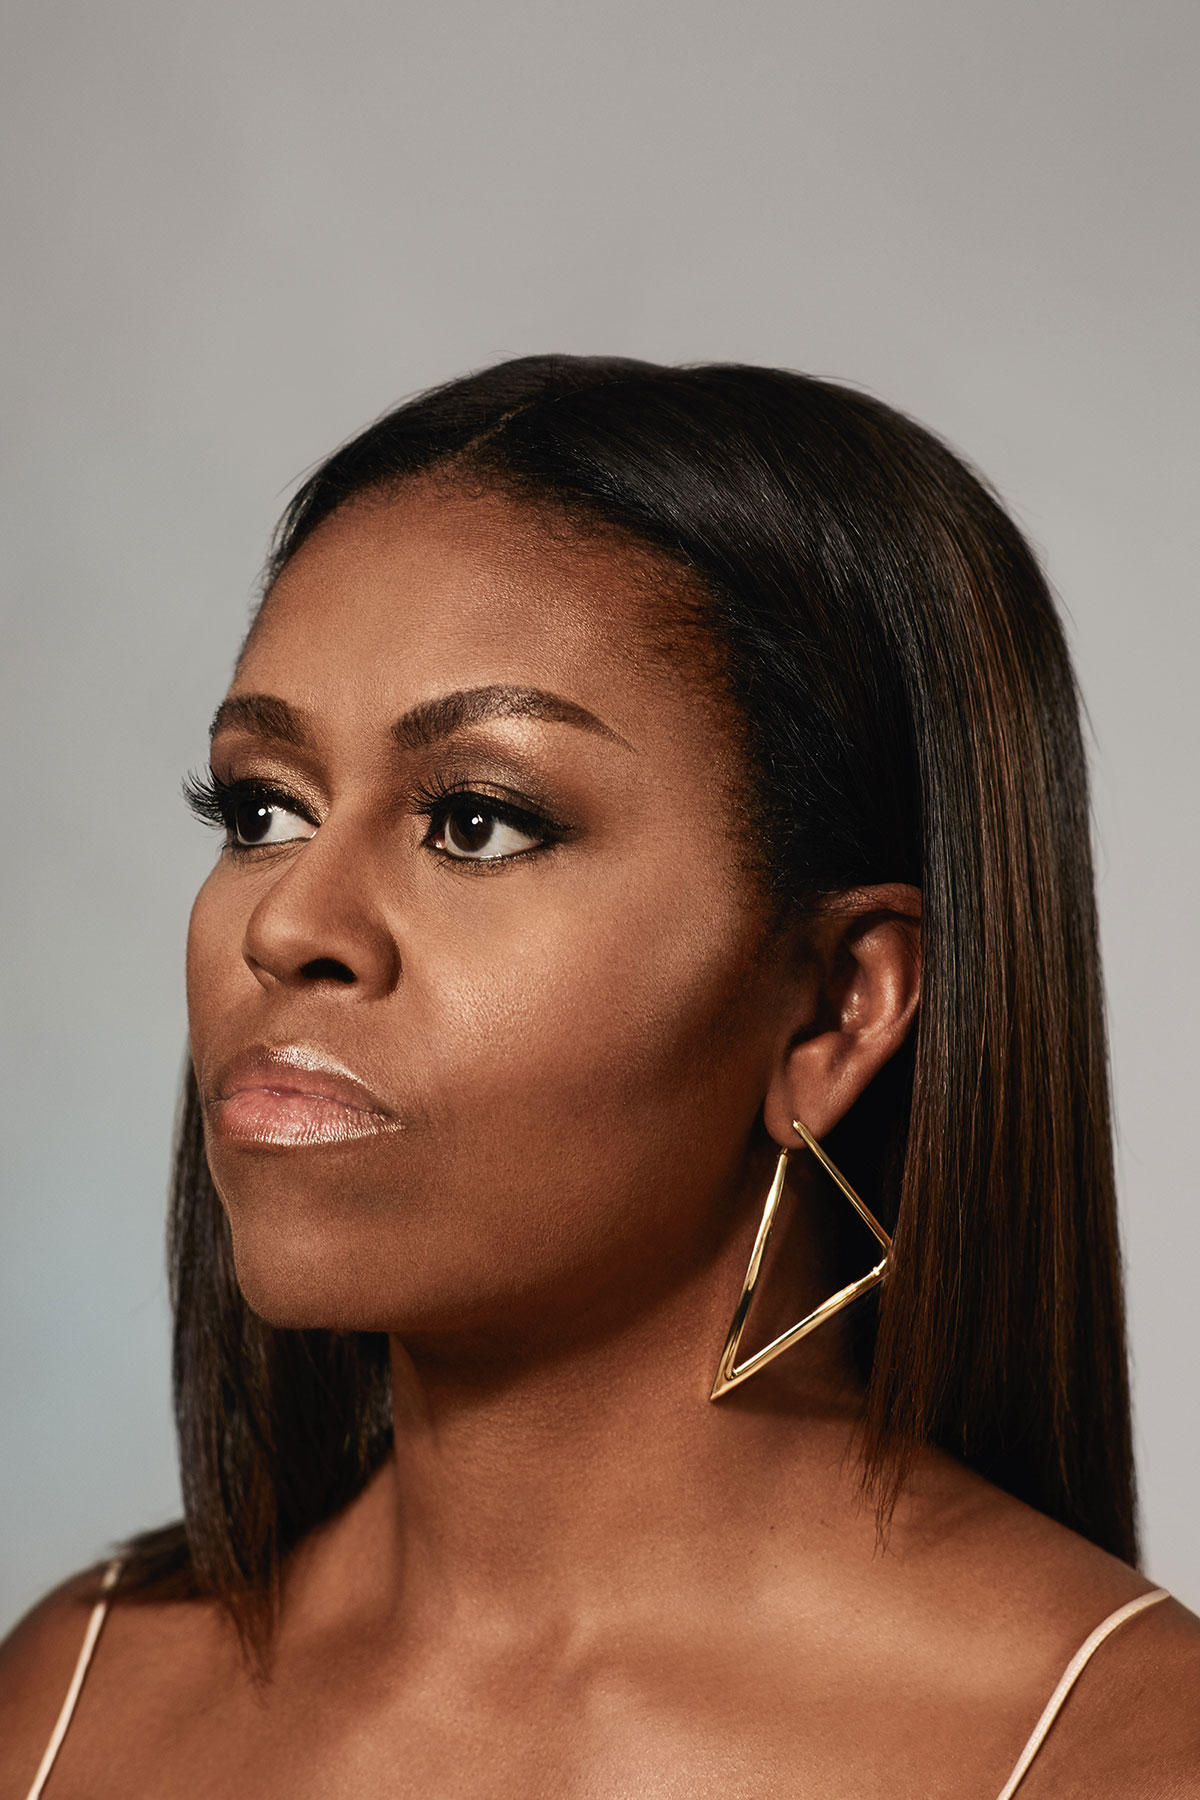 Former first lady of the U.S. Michelle Obama